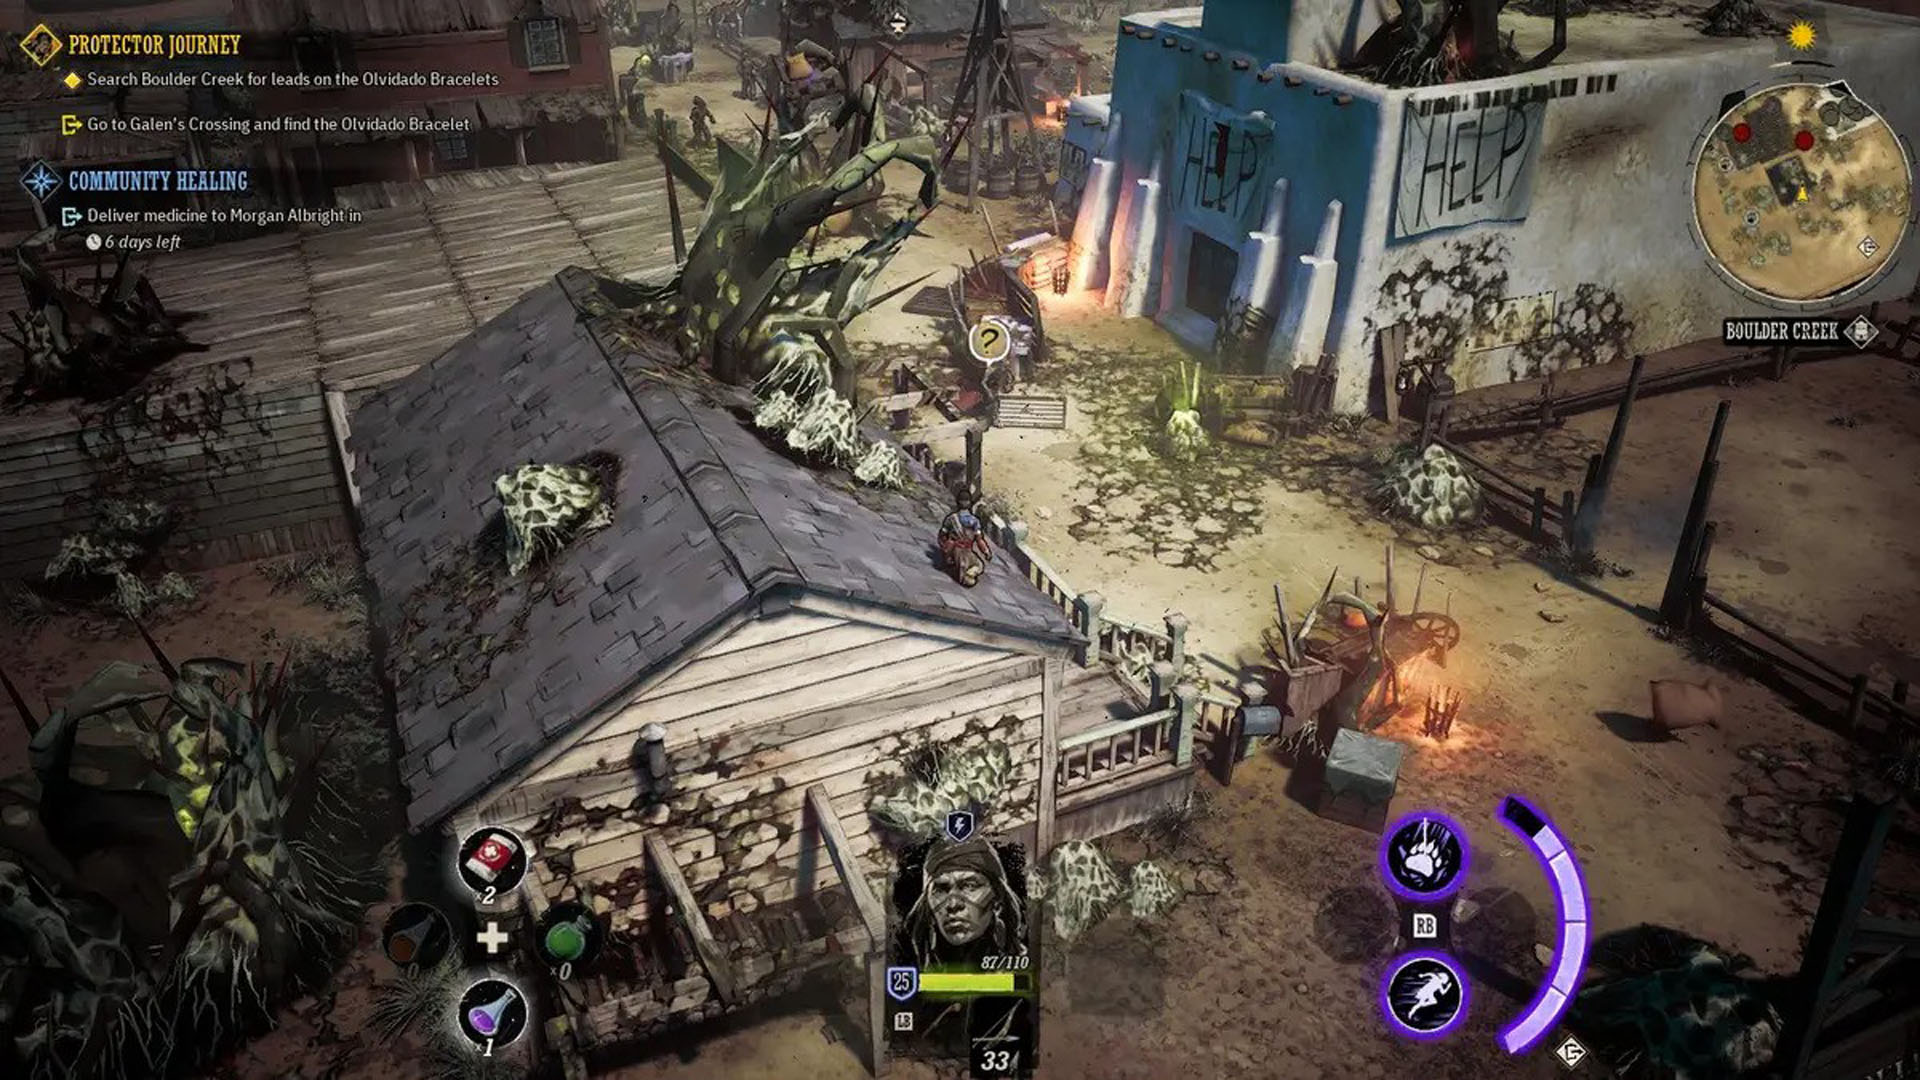 Gameplay scene from Weird West, highlighting its distinctive blend of storytelling and combat